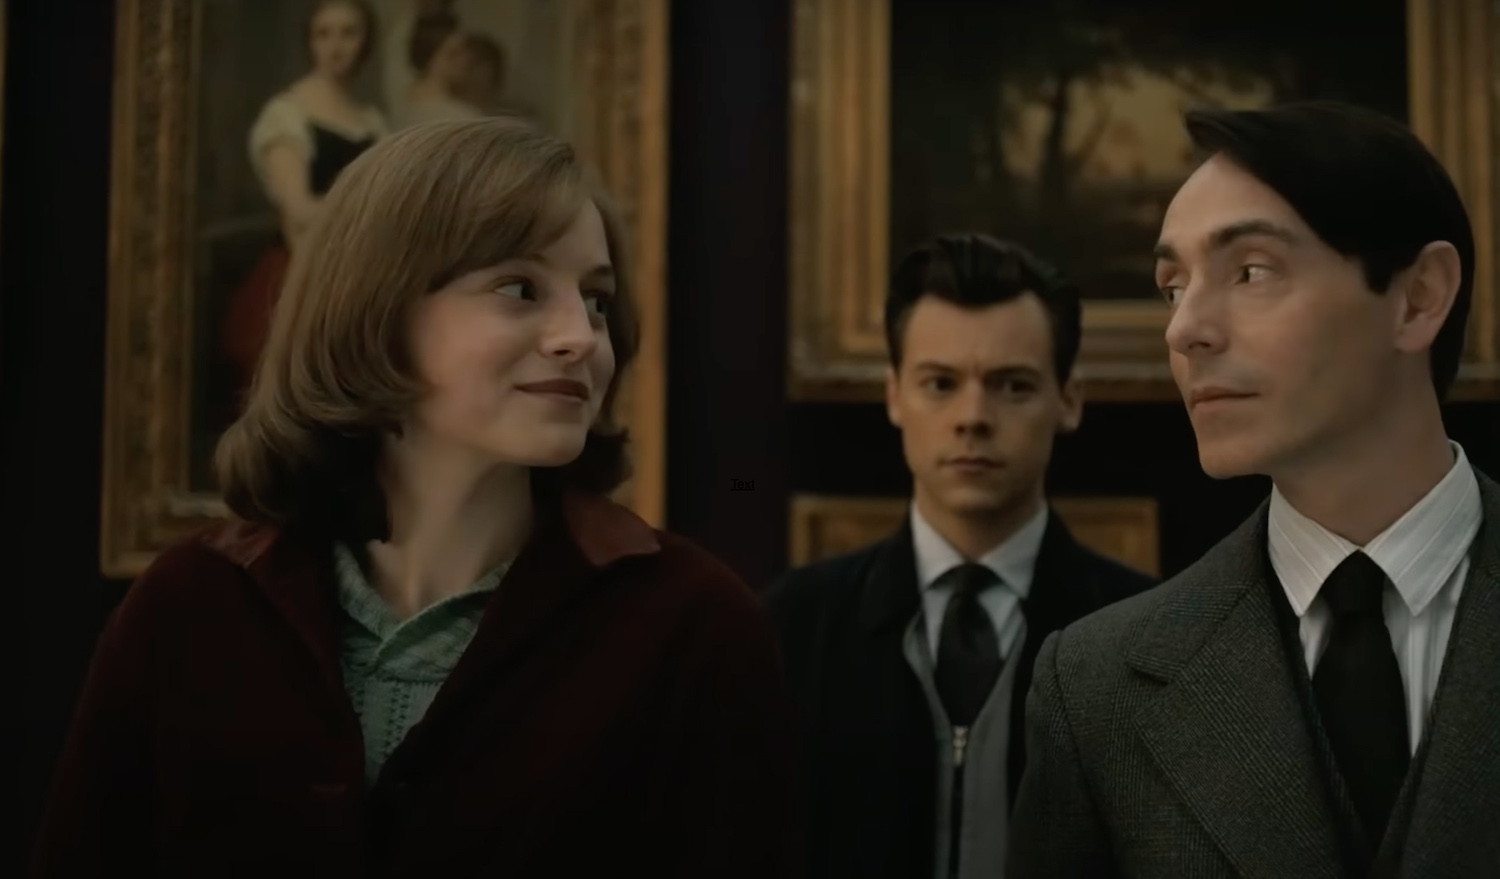 Picture shows: In an art gallery, Marion (Emma Corrin) bonds with Patrick (David Dawson) as Tom (Harry Styles) looks on.